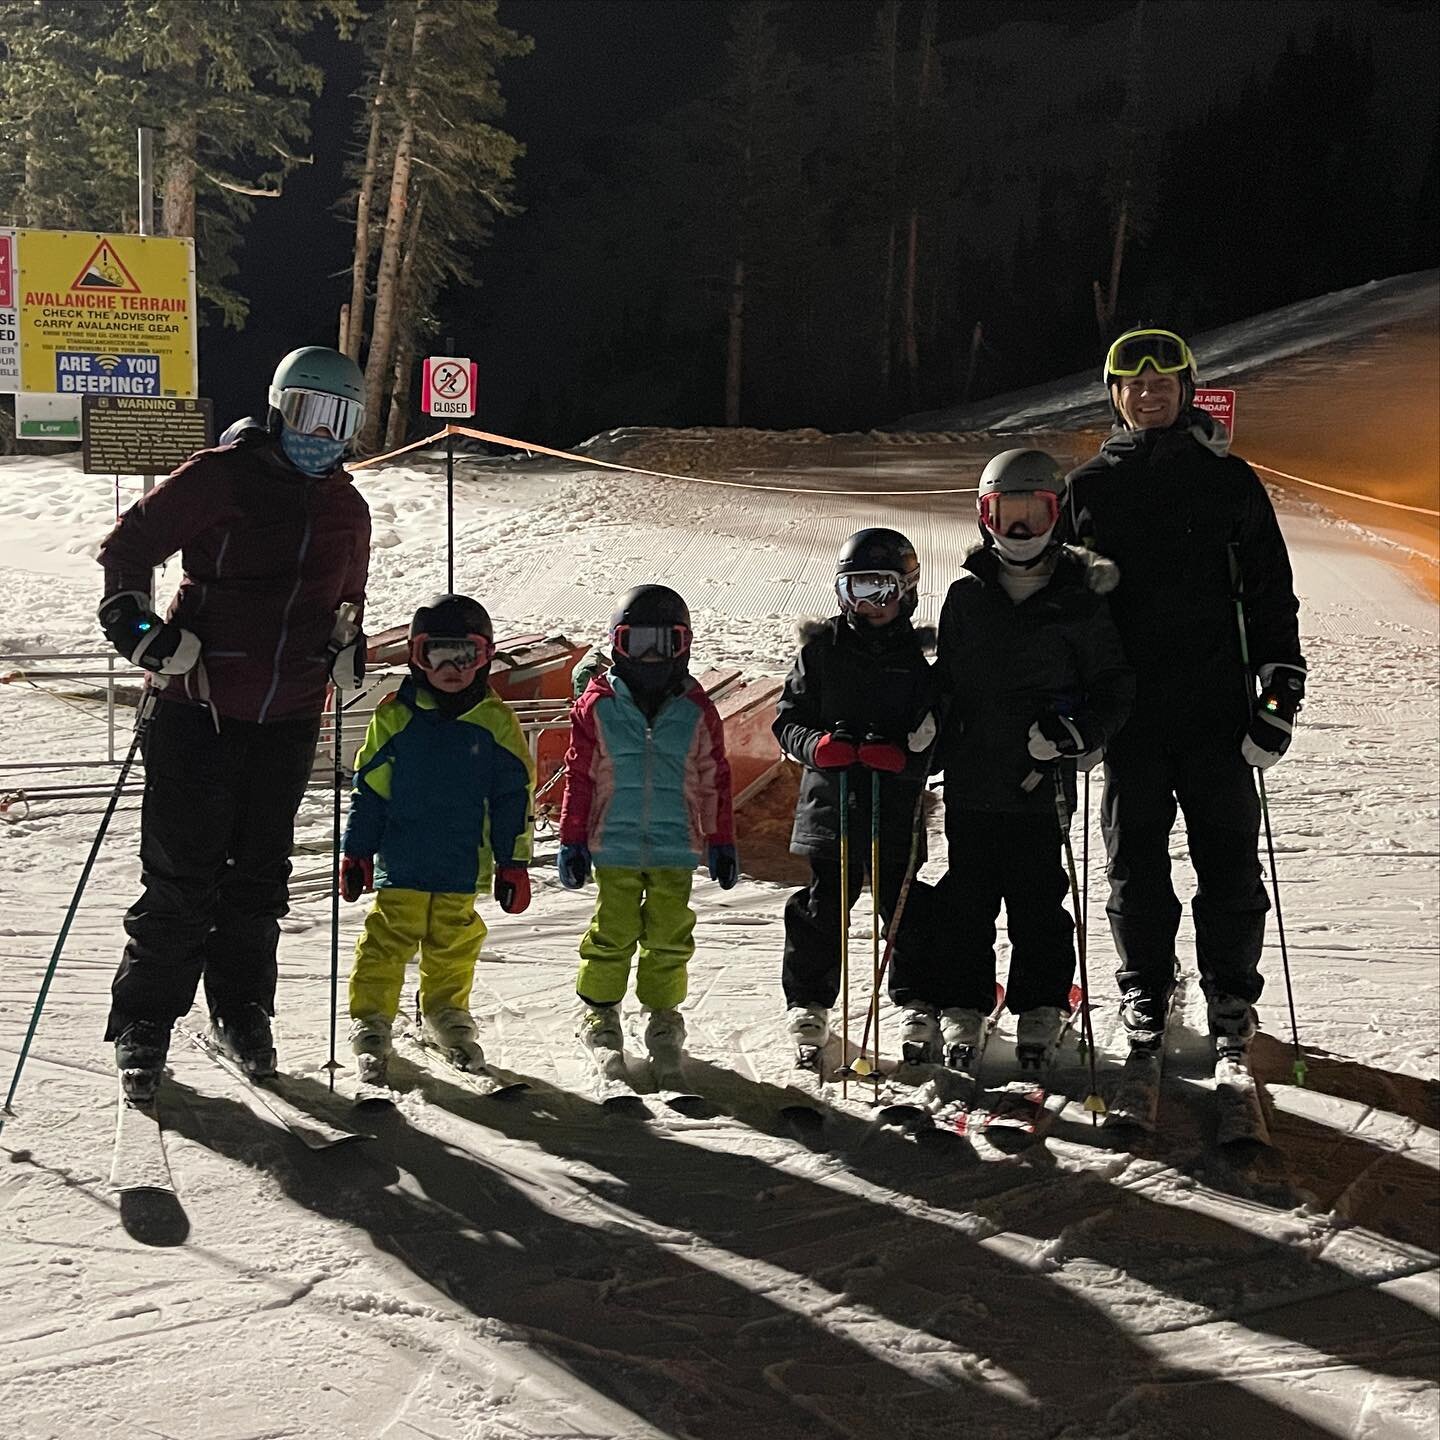 Pure magic! First time riding the chairlift as an entire family. The new Crest 6-pack is as fast as advertised, well done @brightonresort 👏🏼 ⛷️ 

#thephillipsclub #brightonresort #comeshredwithus